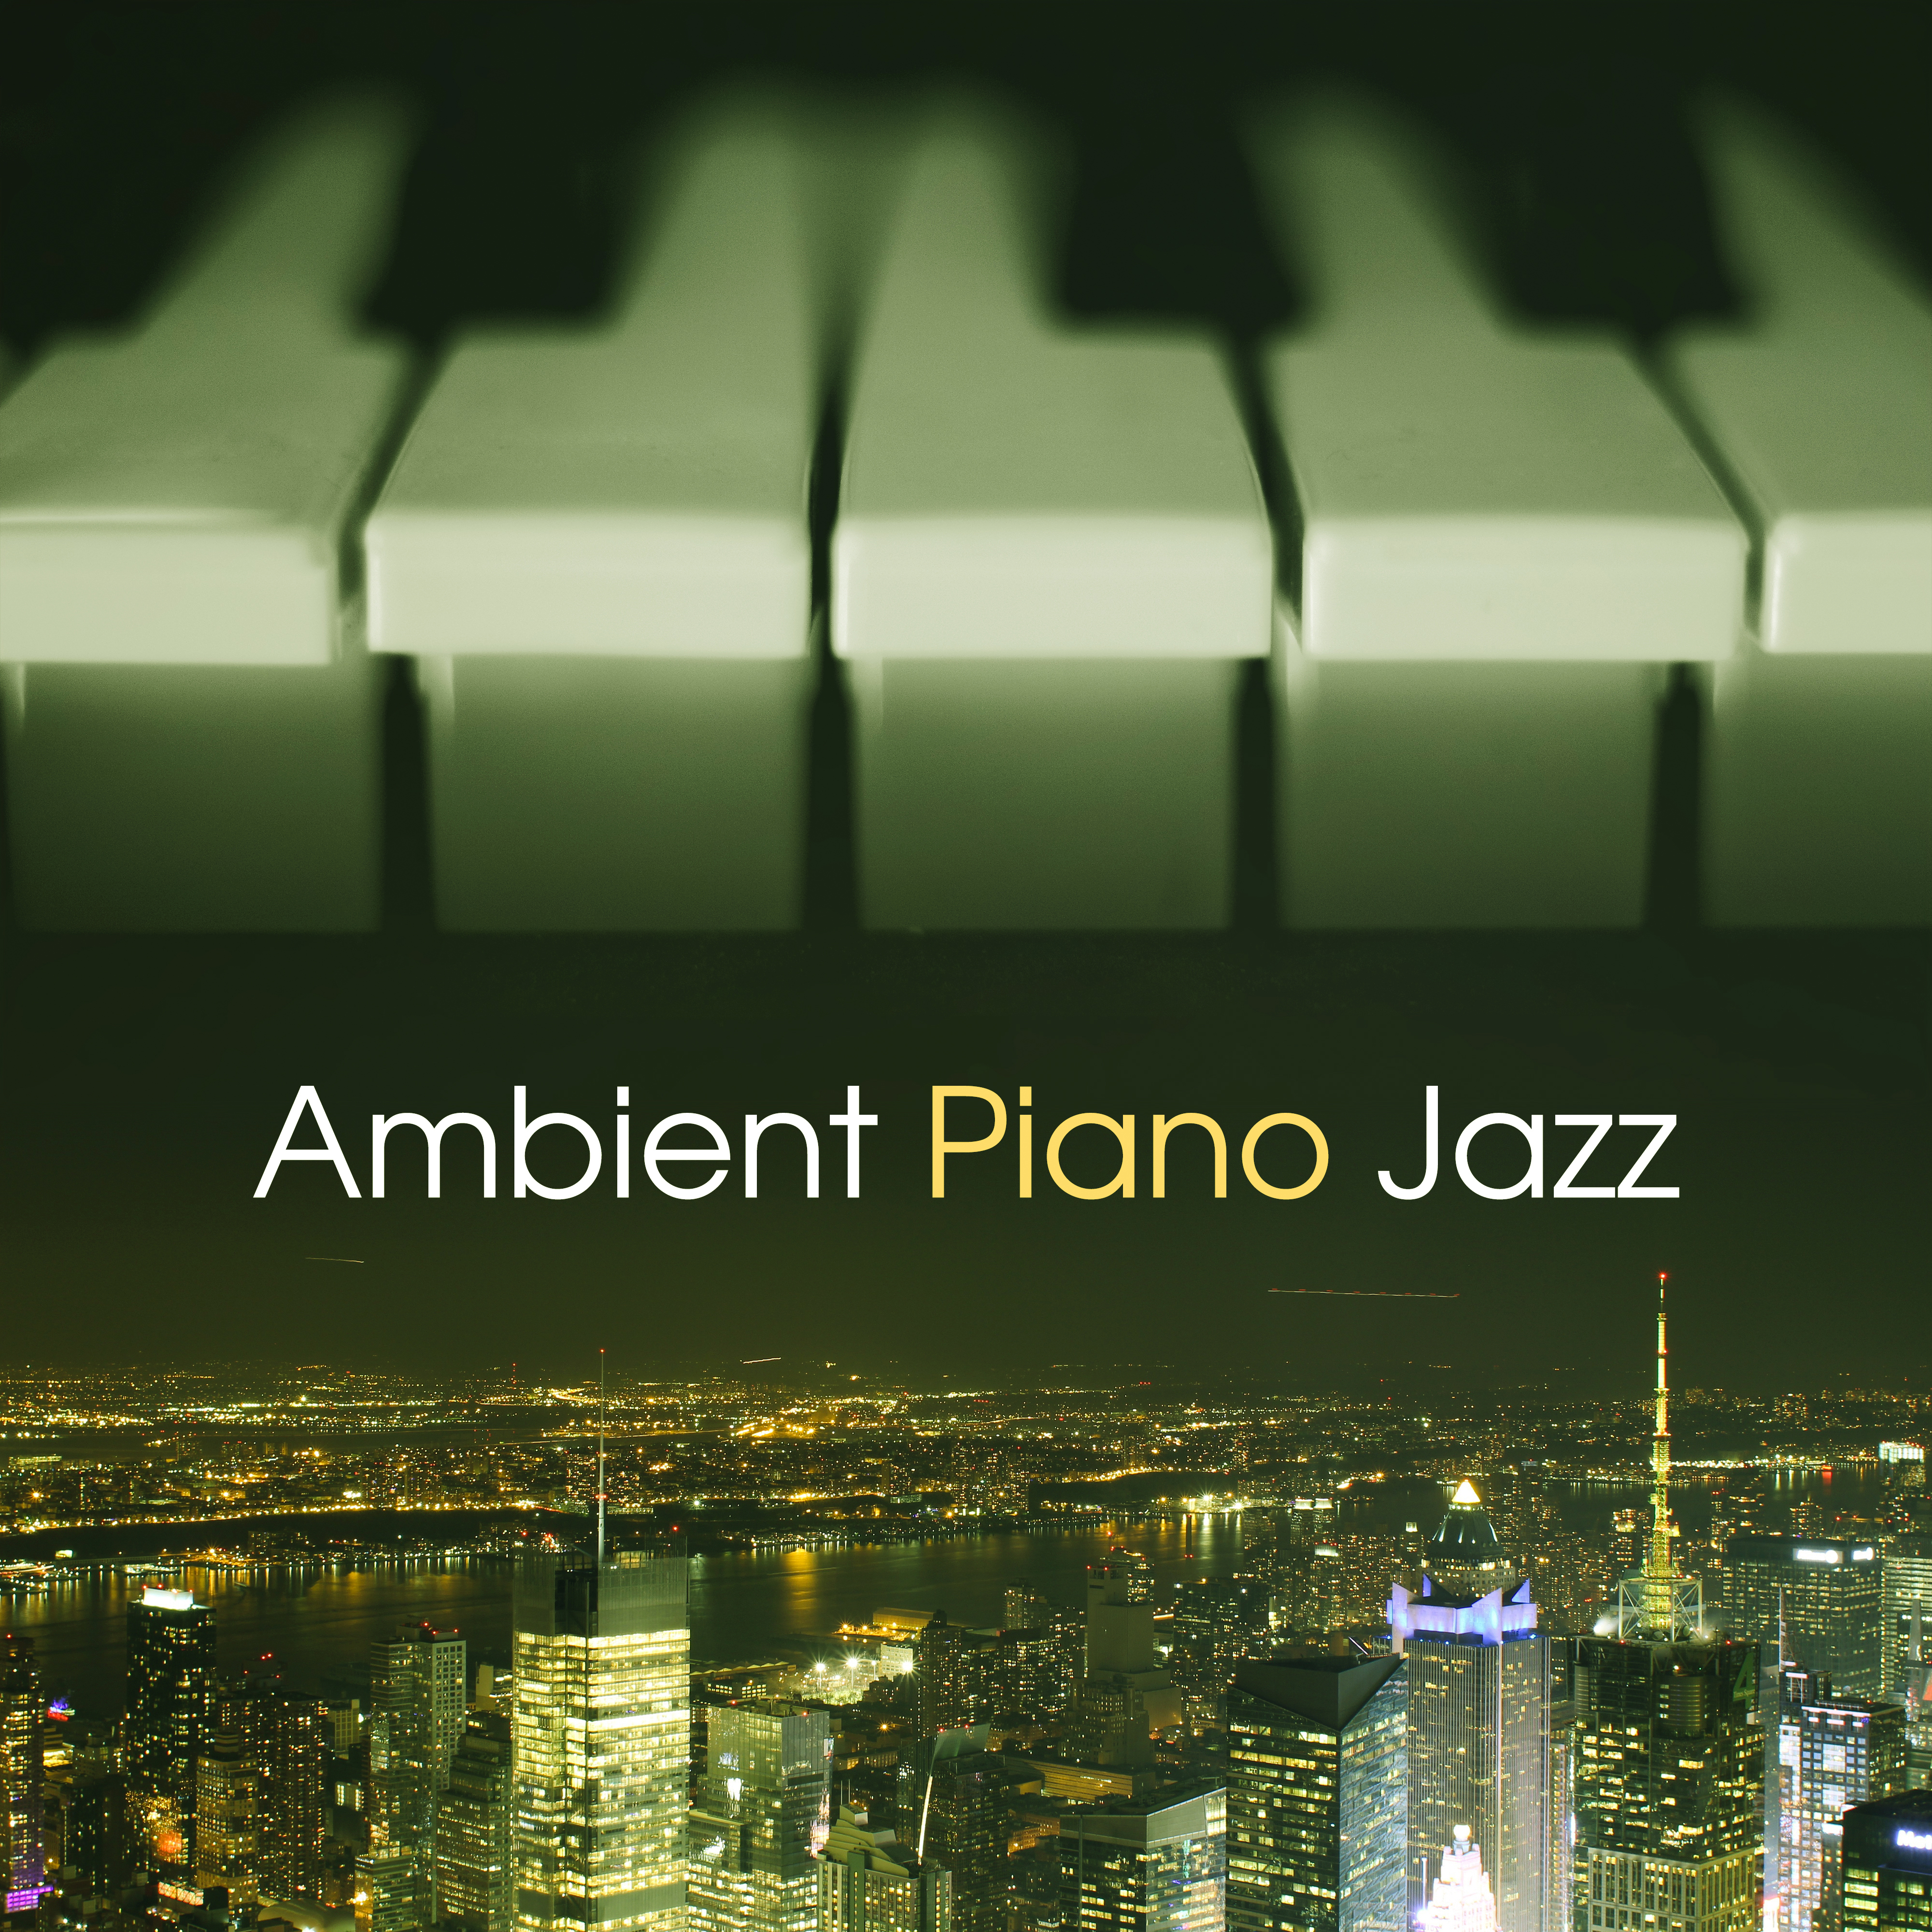 Ambient Piano Jazz – Smooth Jazz Music, Piano Bar, Moonlight Jazz, Soft Sounds to Rest